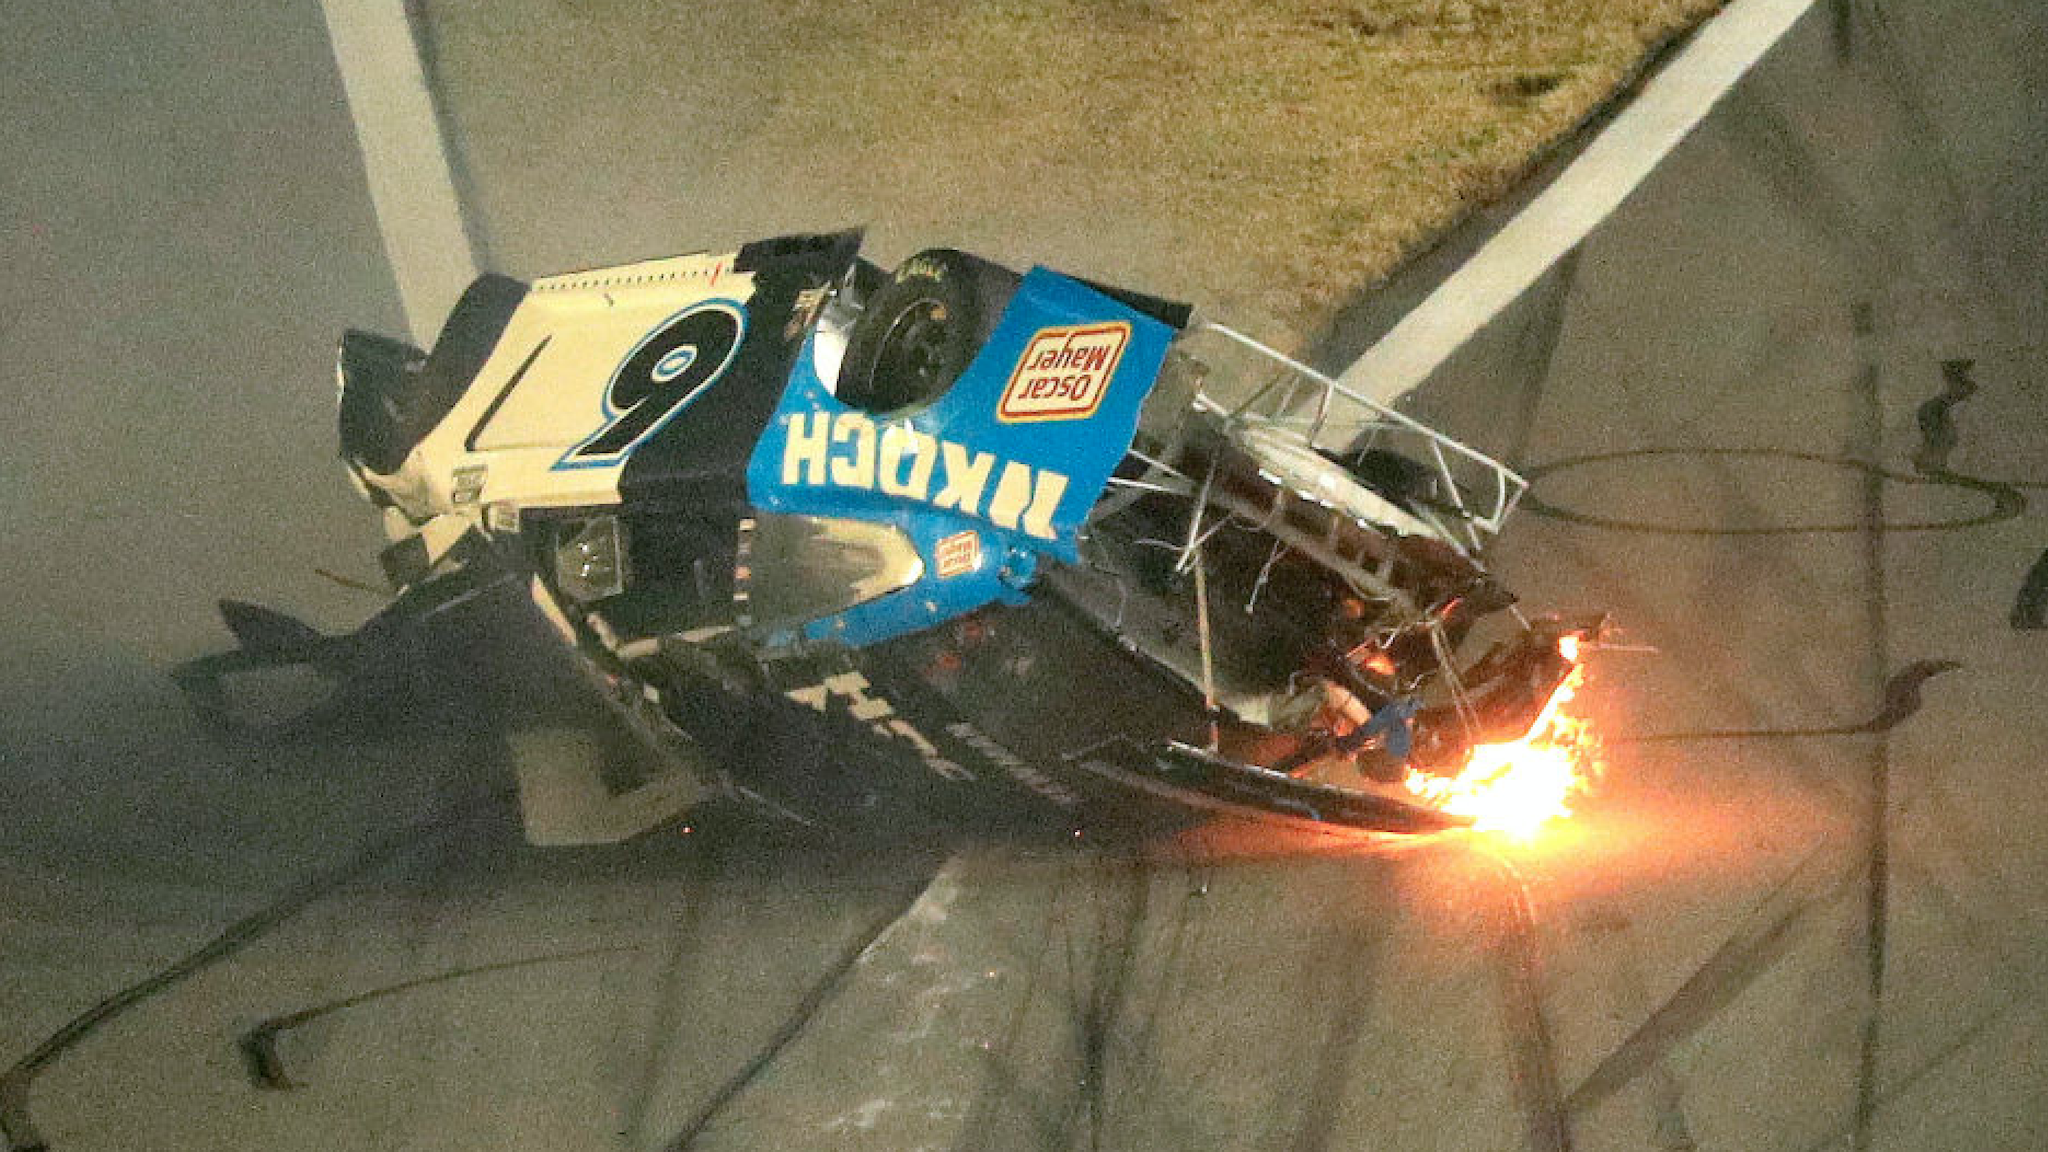 Ryan Newman, driver of the #6 Koch Industries Ford, crashes and flips during the NASCAR Cup Series 62nd Annual Daytona 500 at Daytona International Speedway on February 17, 2020 in Daytona Beach, Florida.